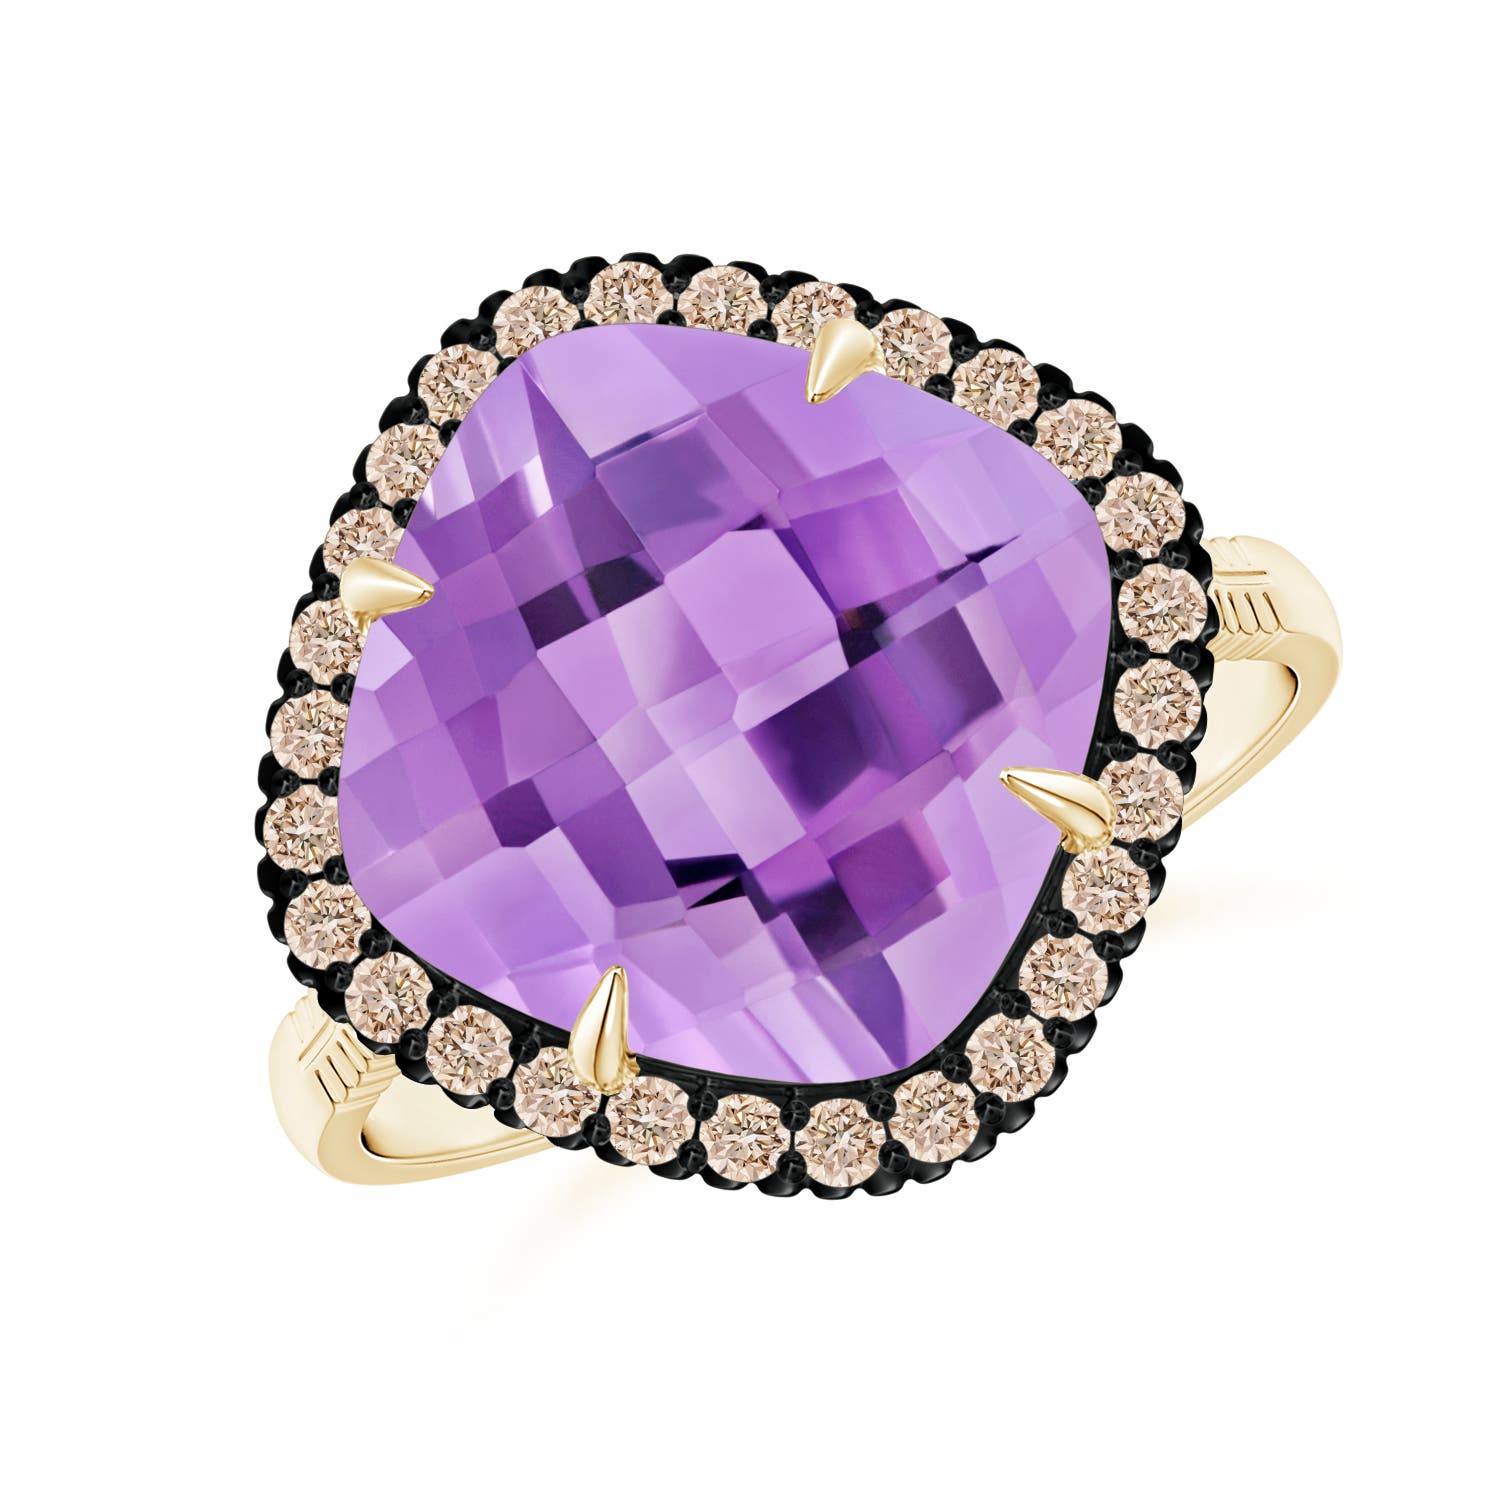 A - Amethyst / 4.98 CT / 14 KT Yellow Gold